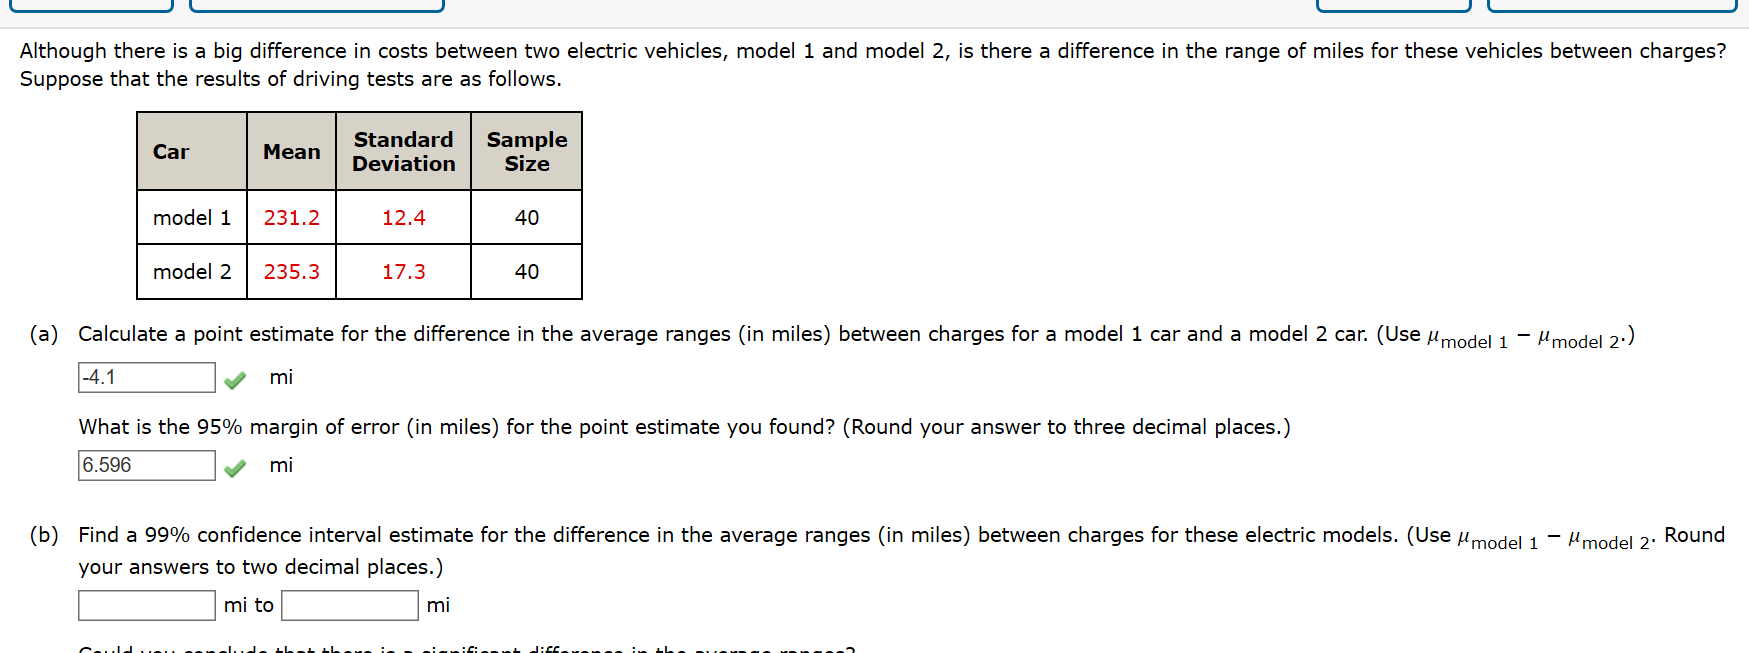 Although there is a big difference in costs between two electric vehicles, model 1 and model 2, is there a difference in the range of miles for these vehicles between charges?
Suppose that the results of driving tests are as follows.
Standard
Deviation
Sample
Size
Car
Mean
model 1
231.2
12.4
40
model 2
235.3
17.3
40
(a) Calculate a point estimate for the difference in the average ranges (in miles) between charges for a model 1 car and a model 2 car. (Use umodel 1- Hmodel 2:)
|-4.1
mi
What is the 95% margin of error (in miles) for the point estimate you found? (Round your answer to three decimal places.)
6.596
mi
(b) Find a 99% confidence interval estimate for the difference in the average ranges (in miles) between charges for these electric models. (Use umodel 1
your answers to two decimal places.)
- Hmodel 2'
Round
mi to
mi
